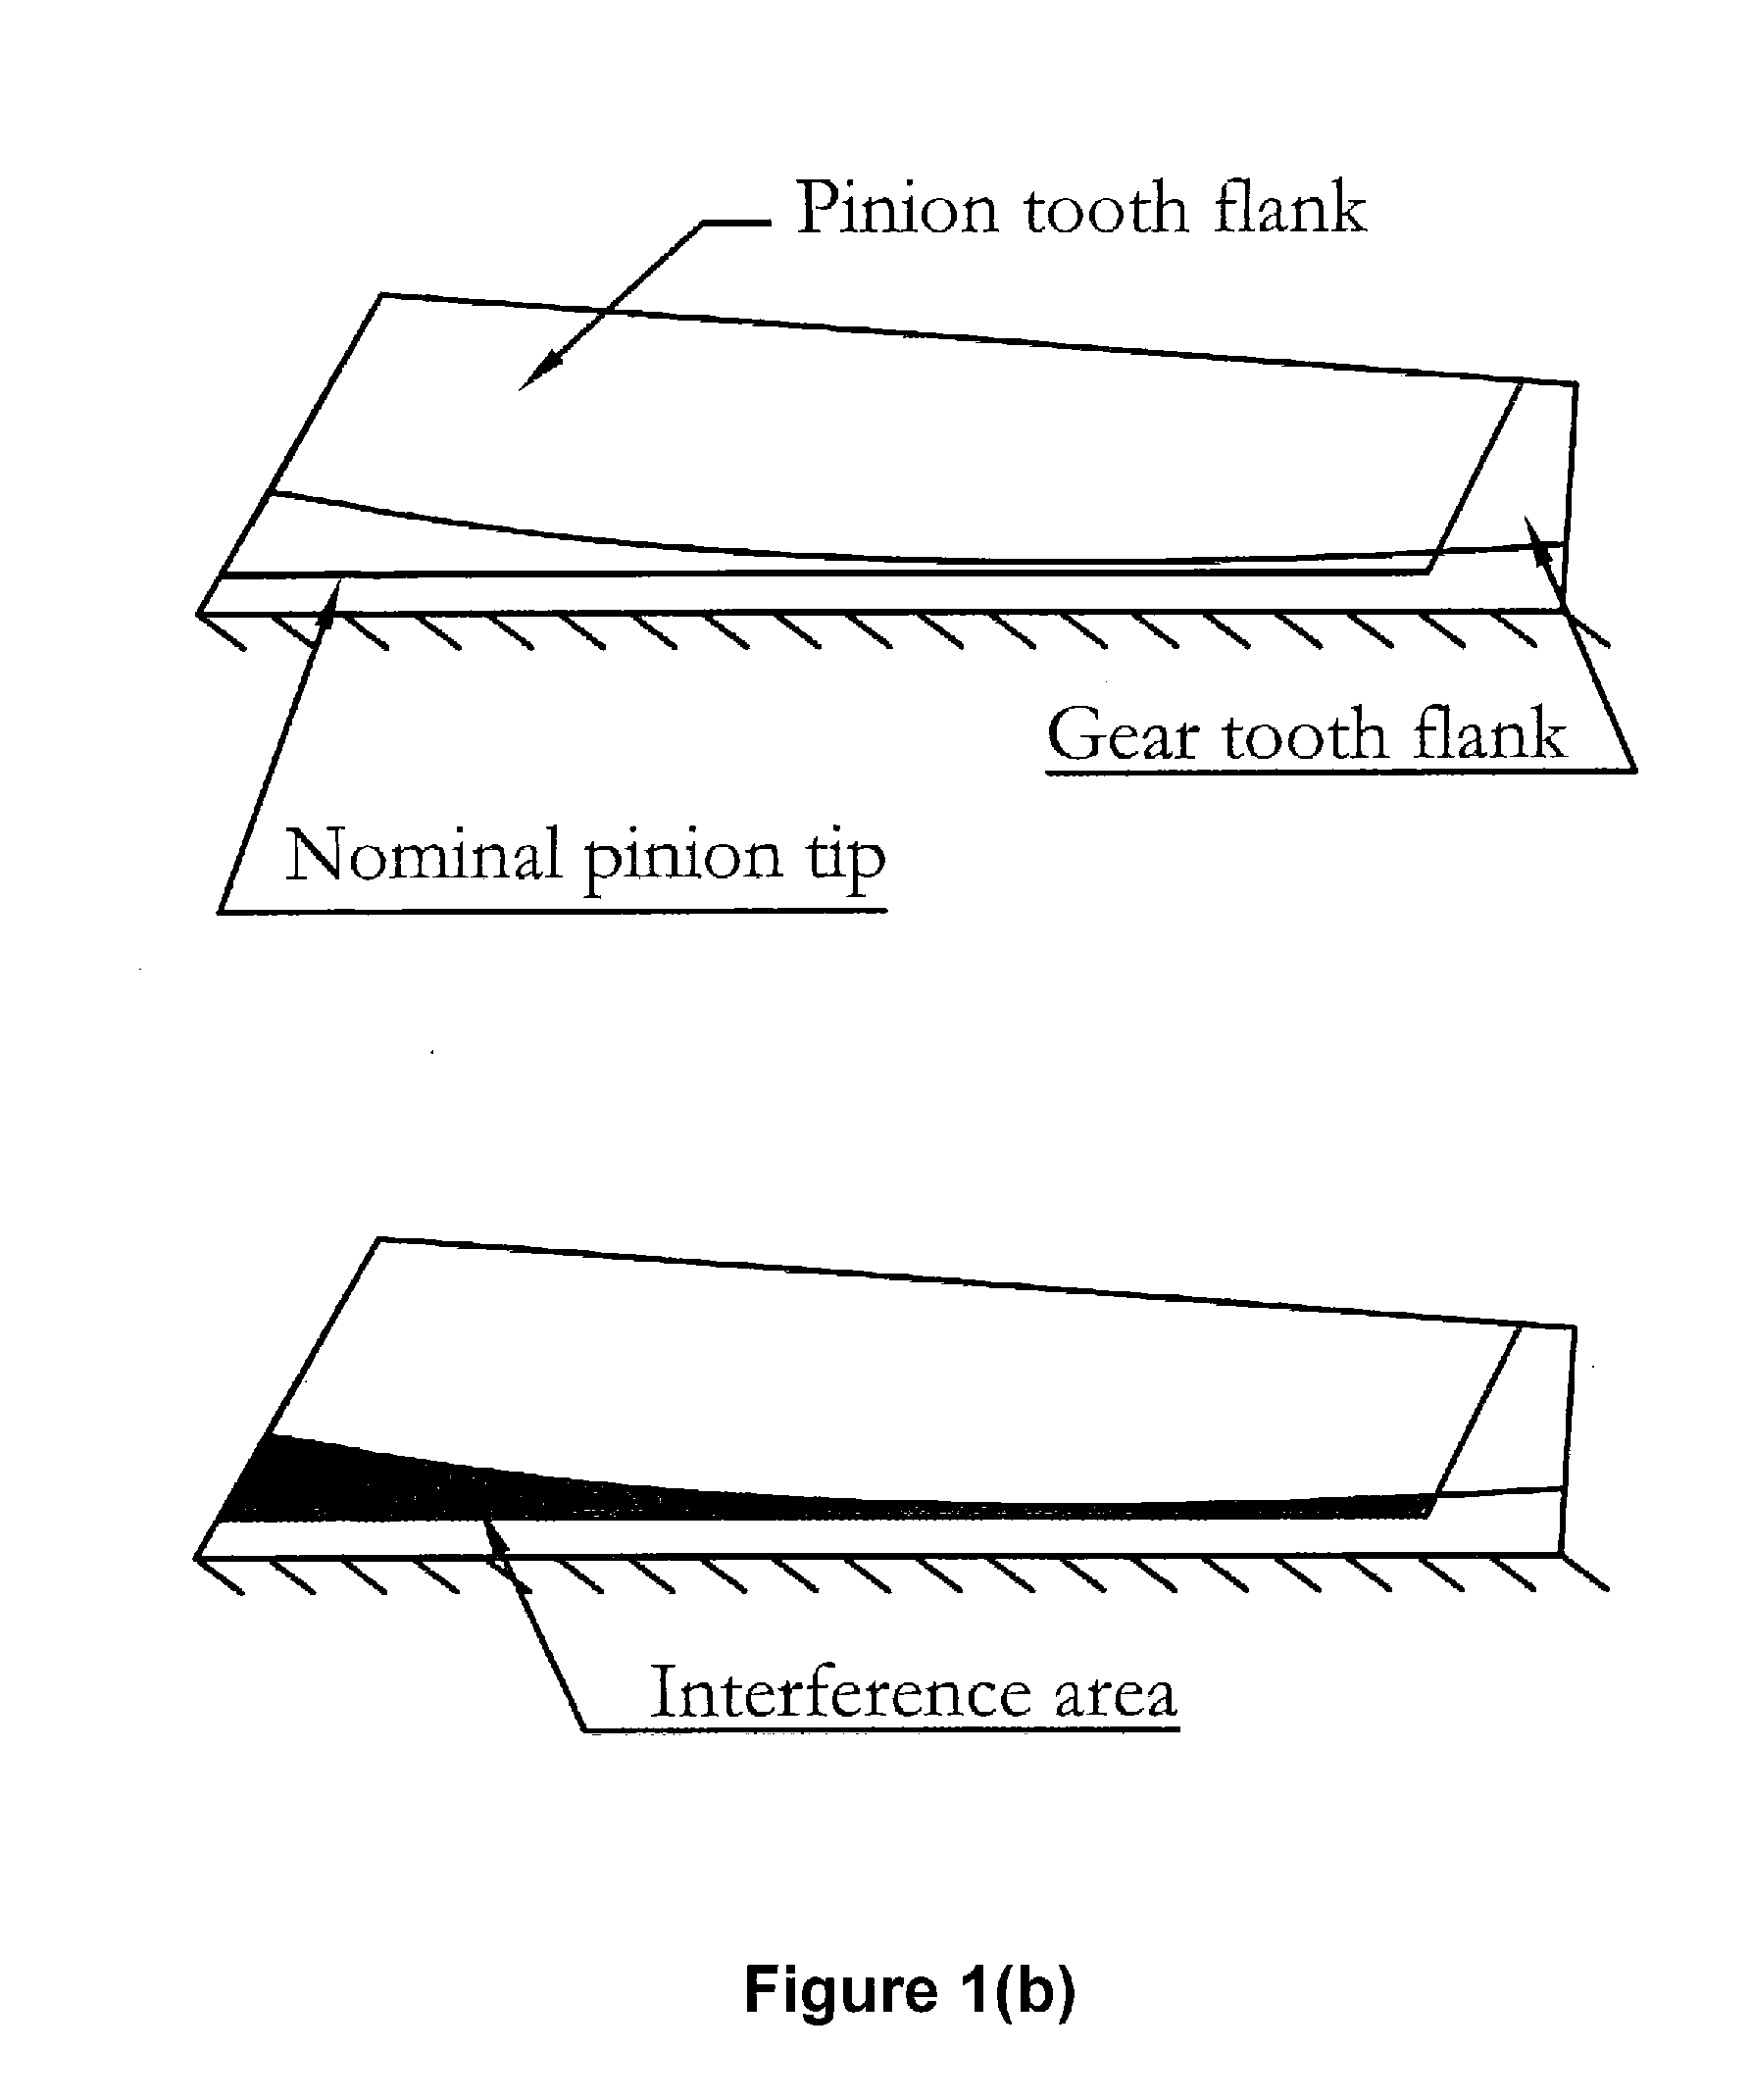 Optimization of face cone element for spiral bevel and hypoid gears